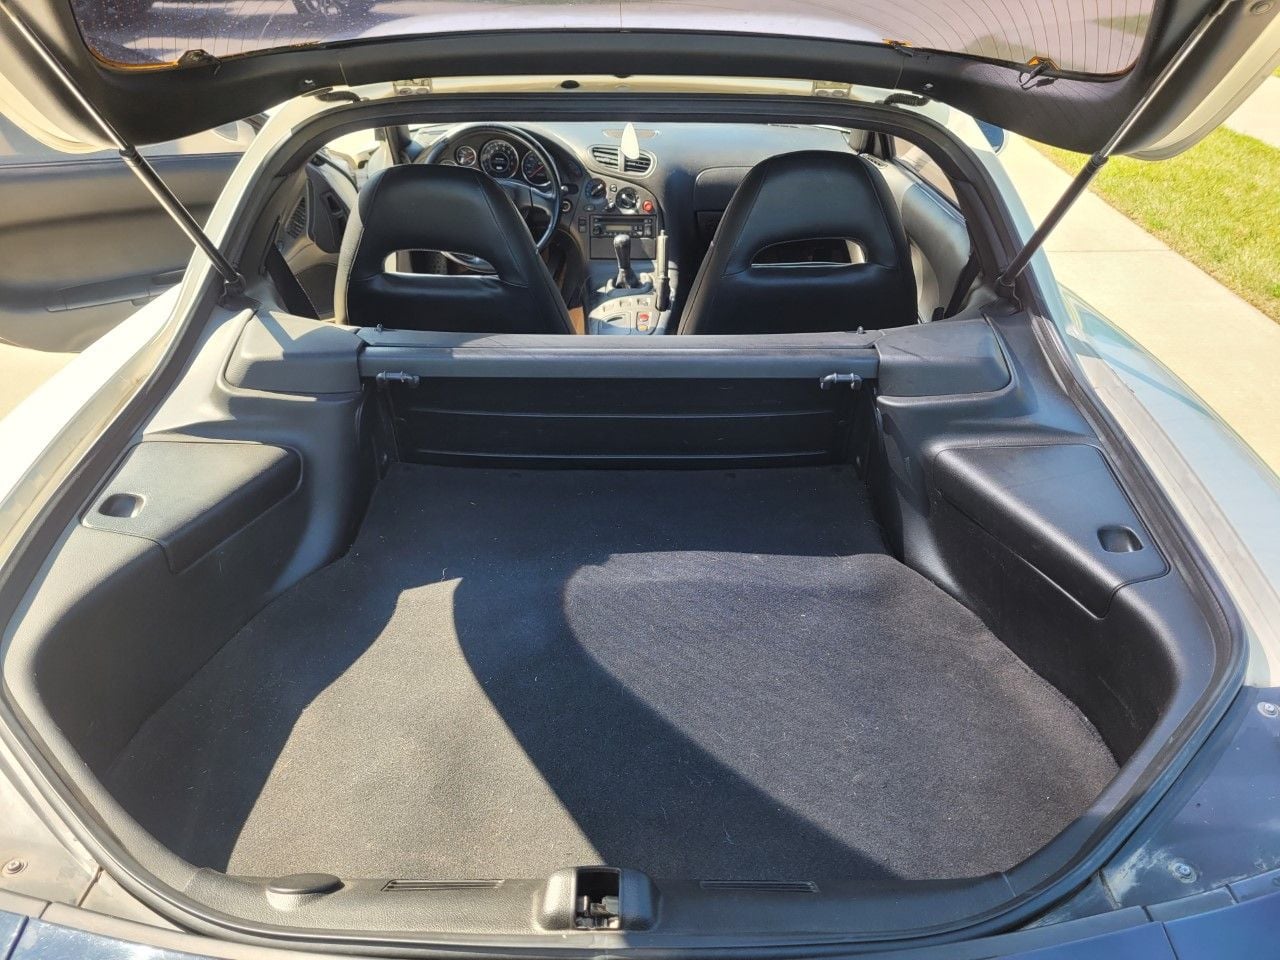 1993 Mazda RX-7 - 1993 RX-7 FD For Sale with Videos - Used - VIN 1993 RX-7 FD For - 144,000 Miles - Manual - White - Columbia, MO 65203, United States